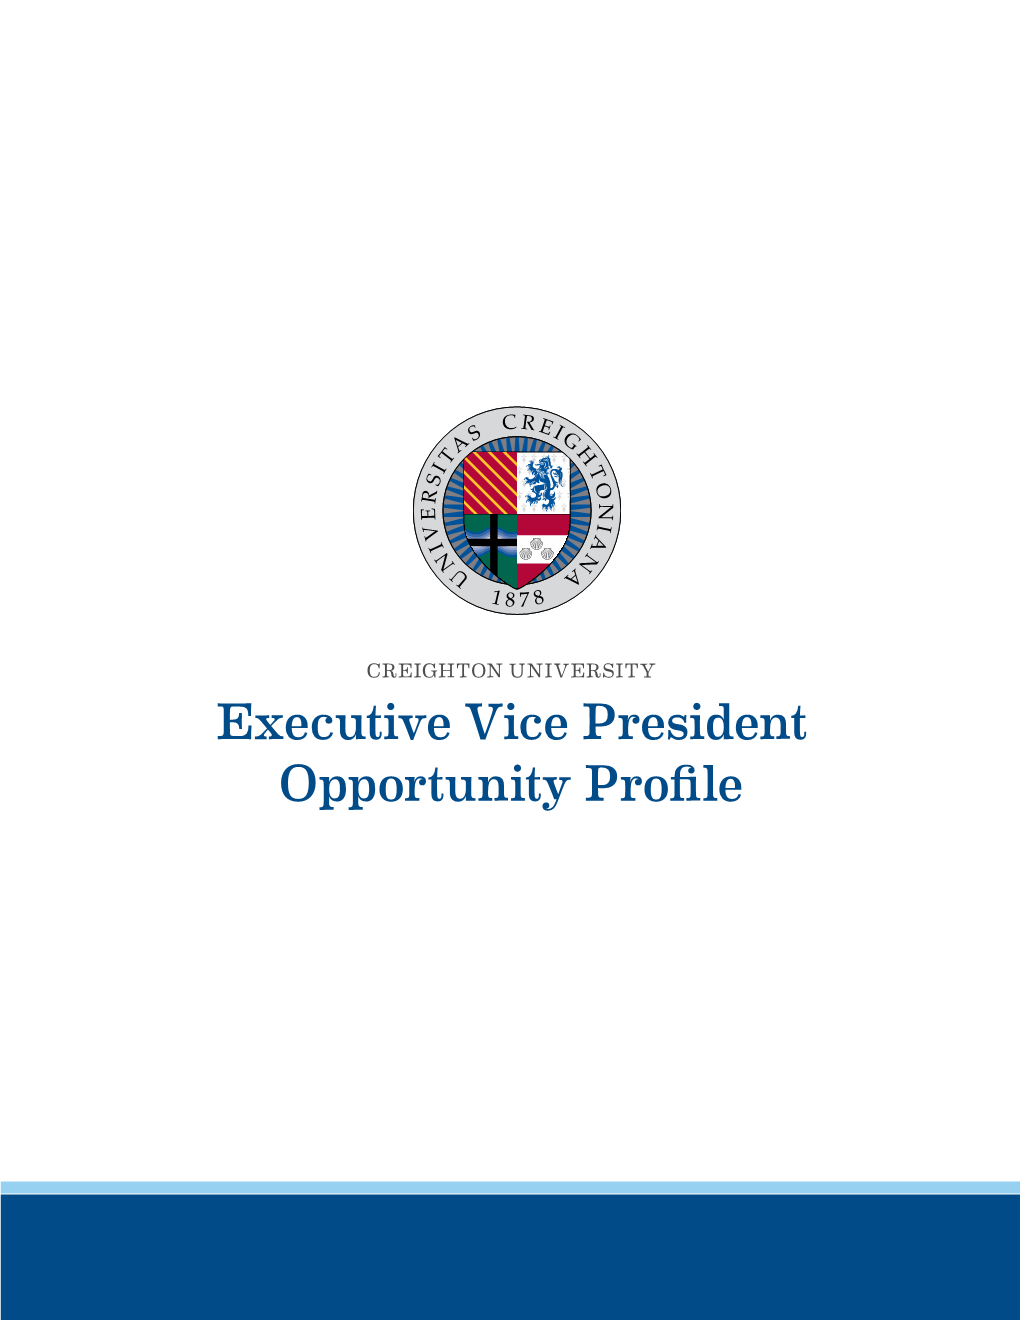 Executive Vice President Opportunity Profile Executive Vice President: Opportunity Profile